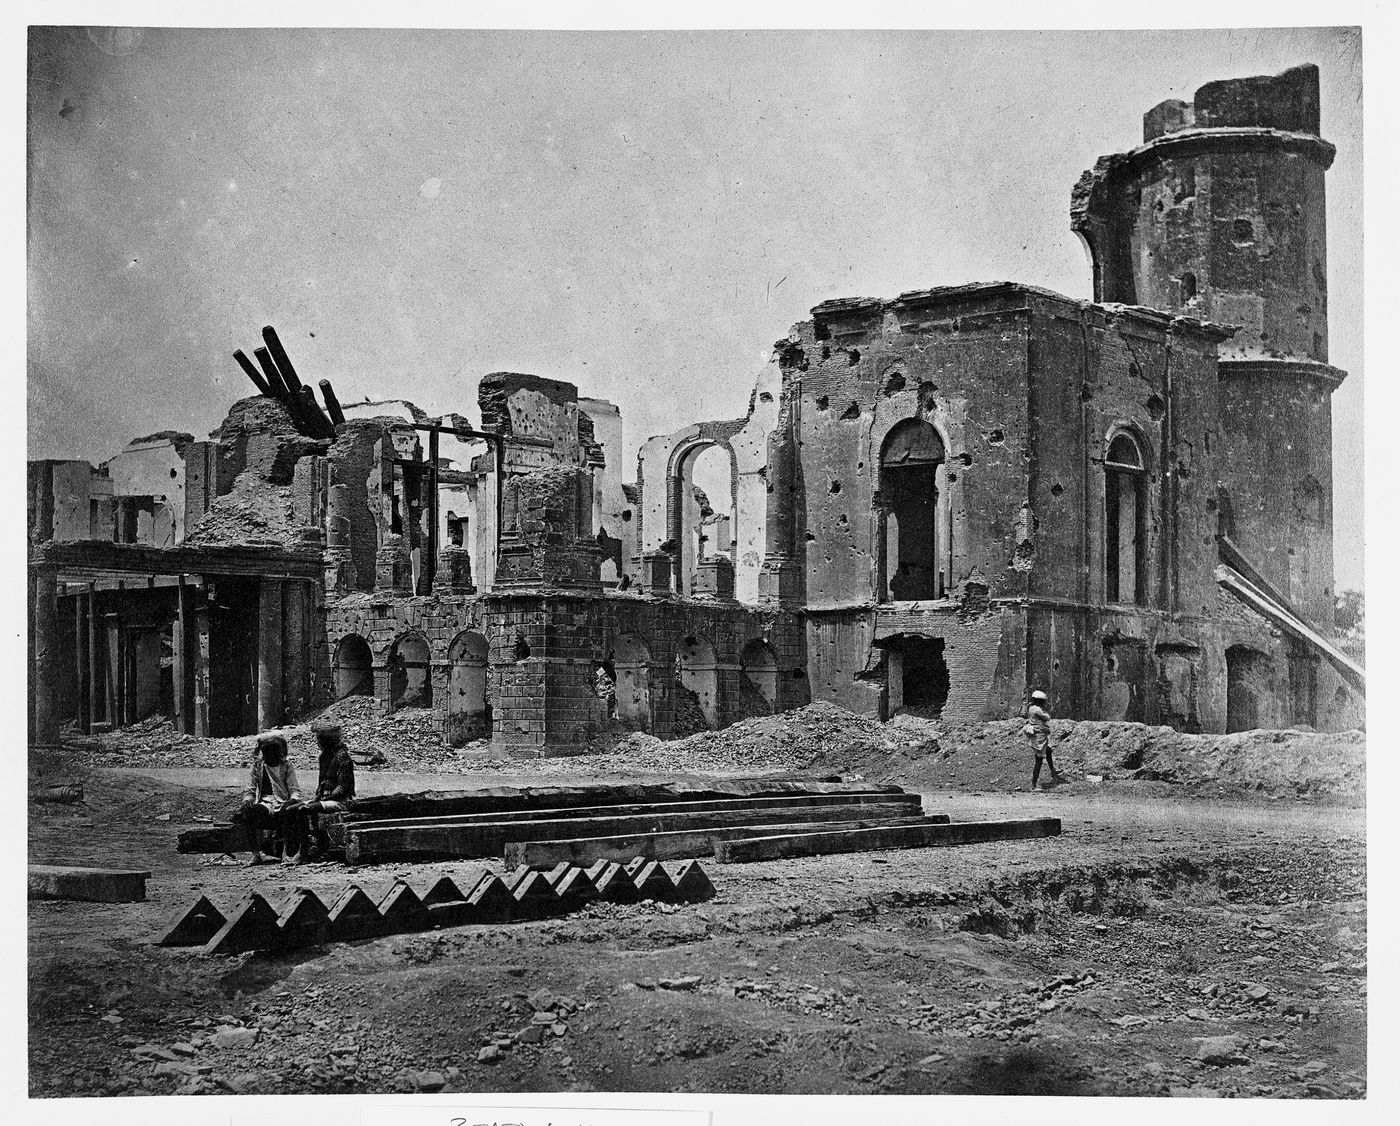 View of the ruins of the Residency Complex showing the building in which the Chief Commissioner of Oudh, Sir Henry Lawrence died, Lucknow, India